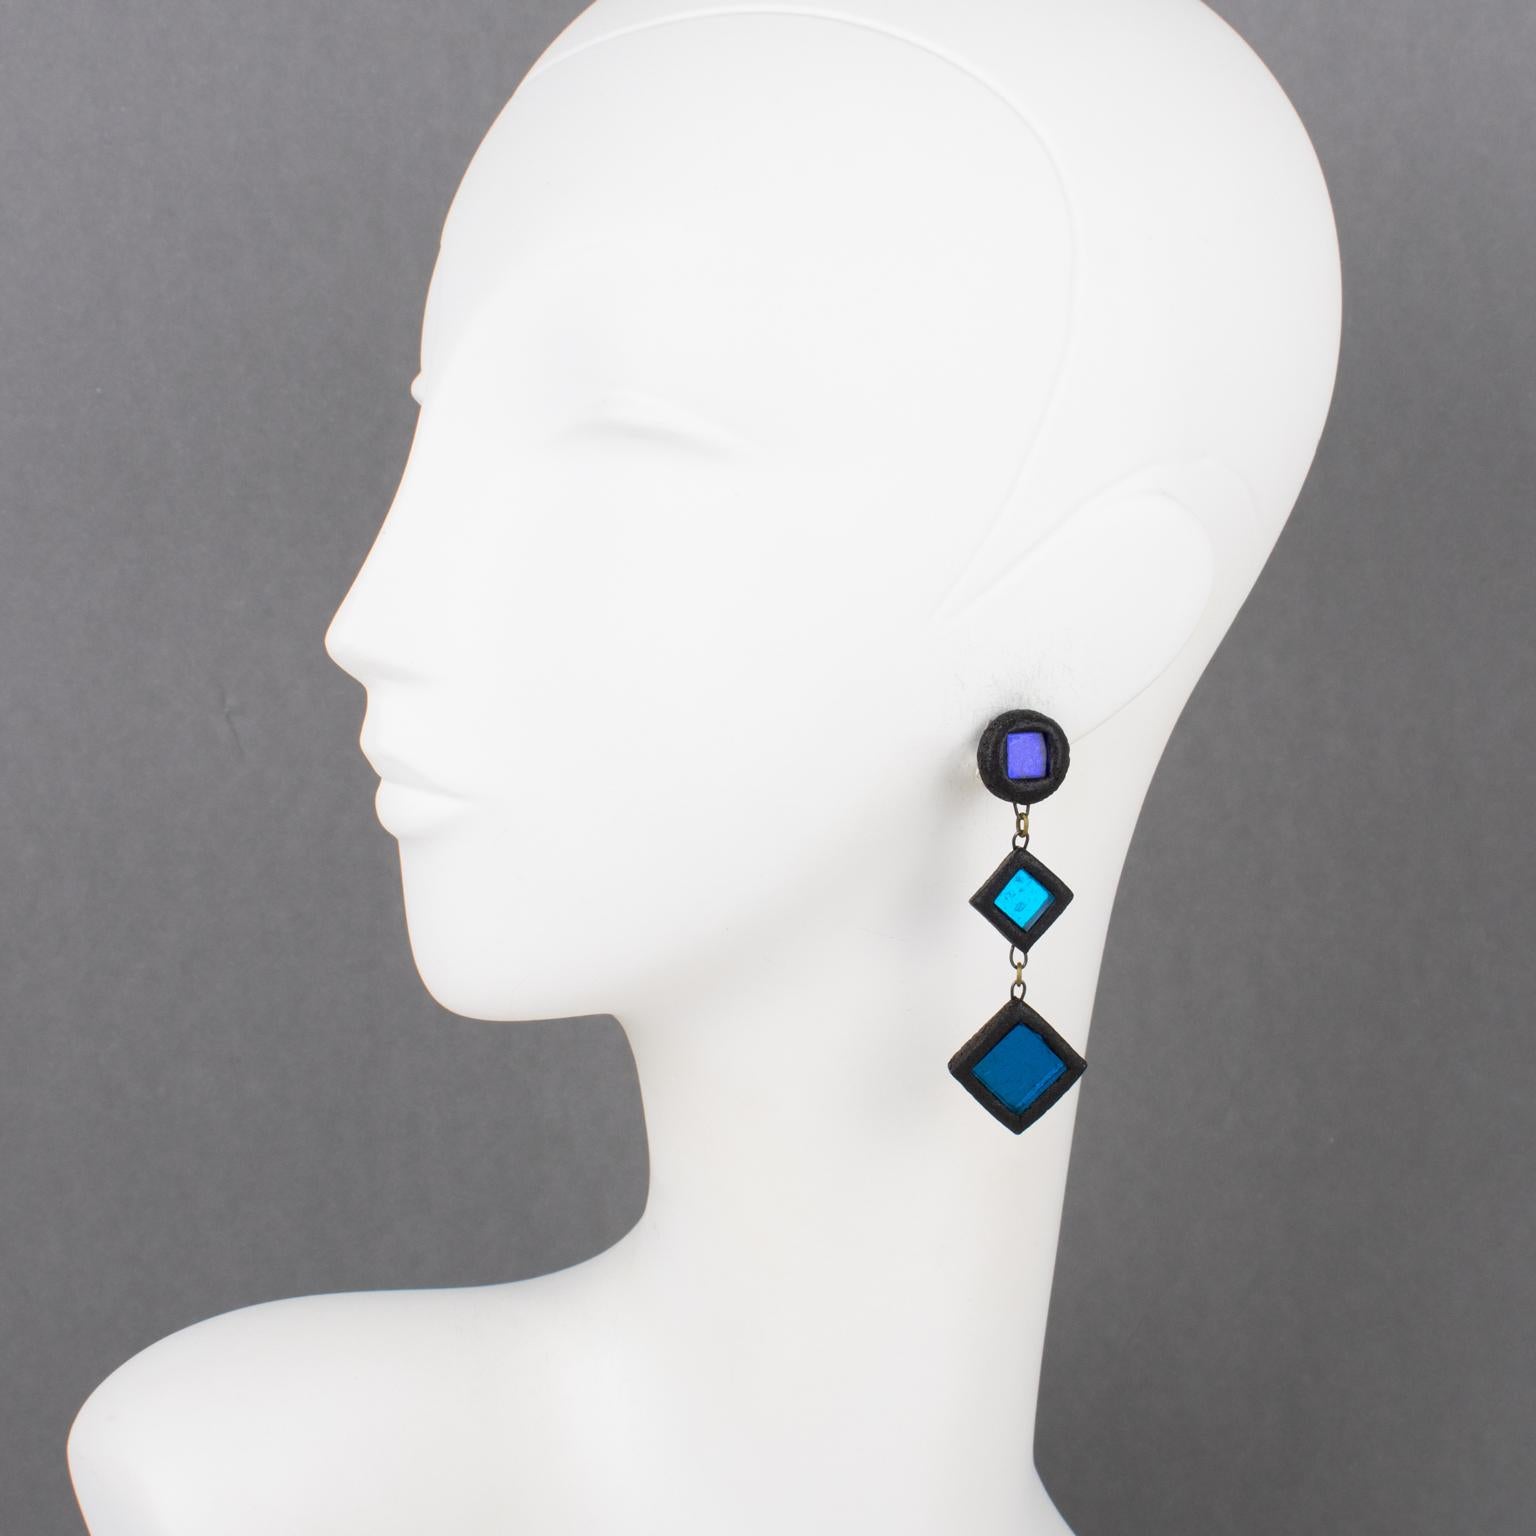 These gorgeous Irena Jaworska Talosel clip-on earrings feature a geometric square shape with black resin framing ornate with mirrors in cobalt blue and cerulean blue colors. Irena Jaworska is one of the Line Vautrin School students whose work has